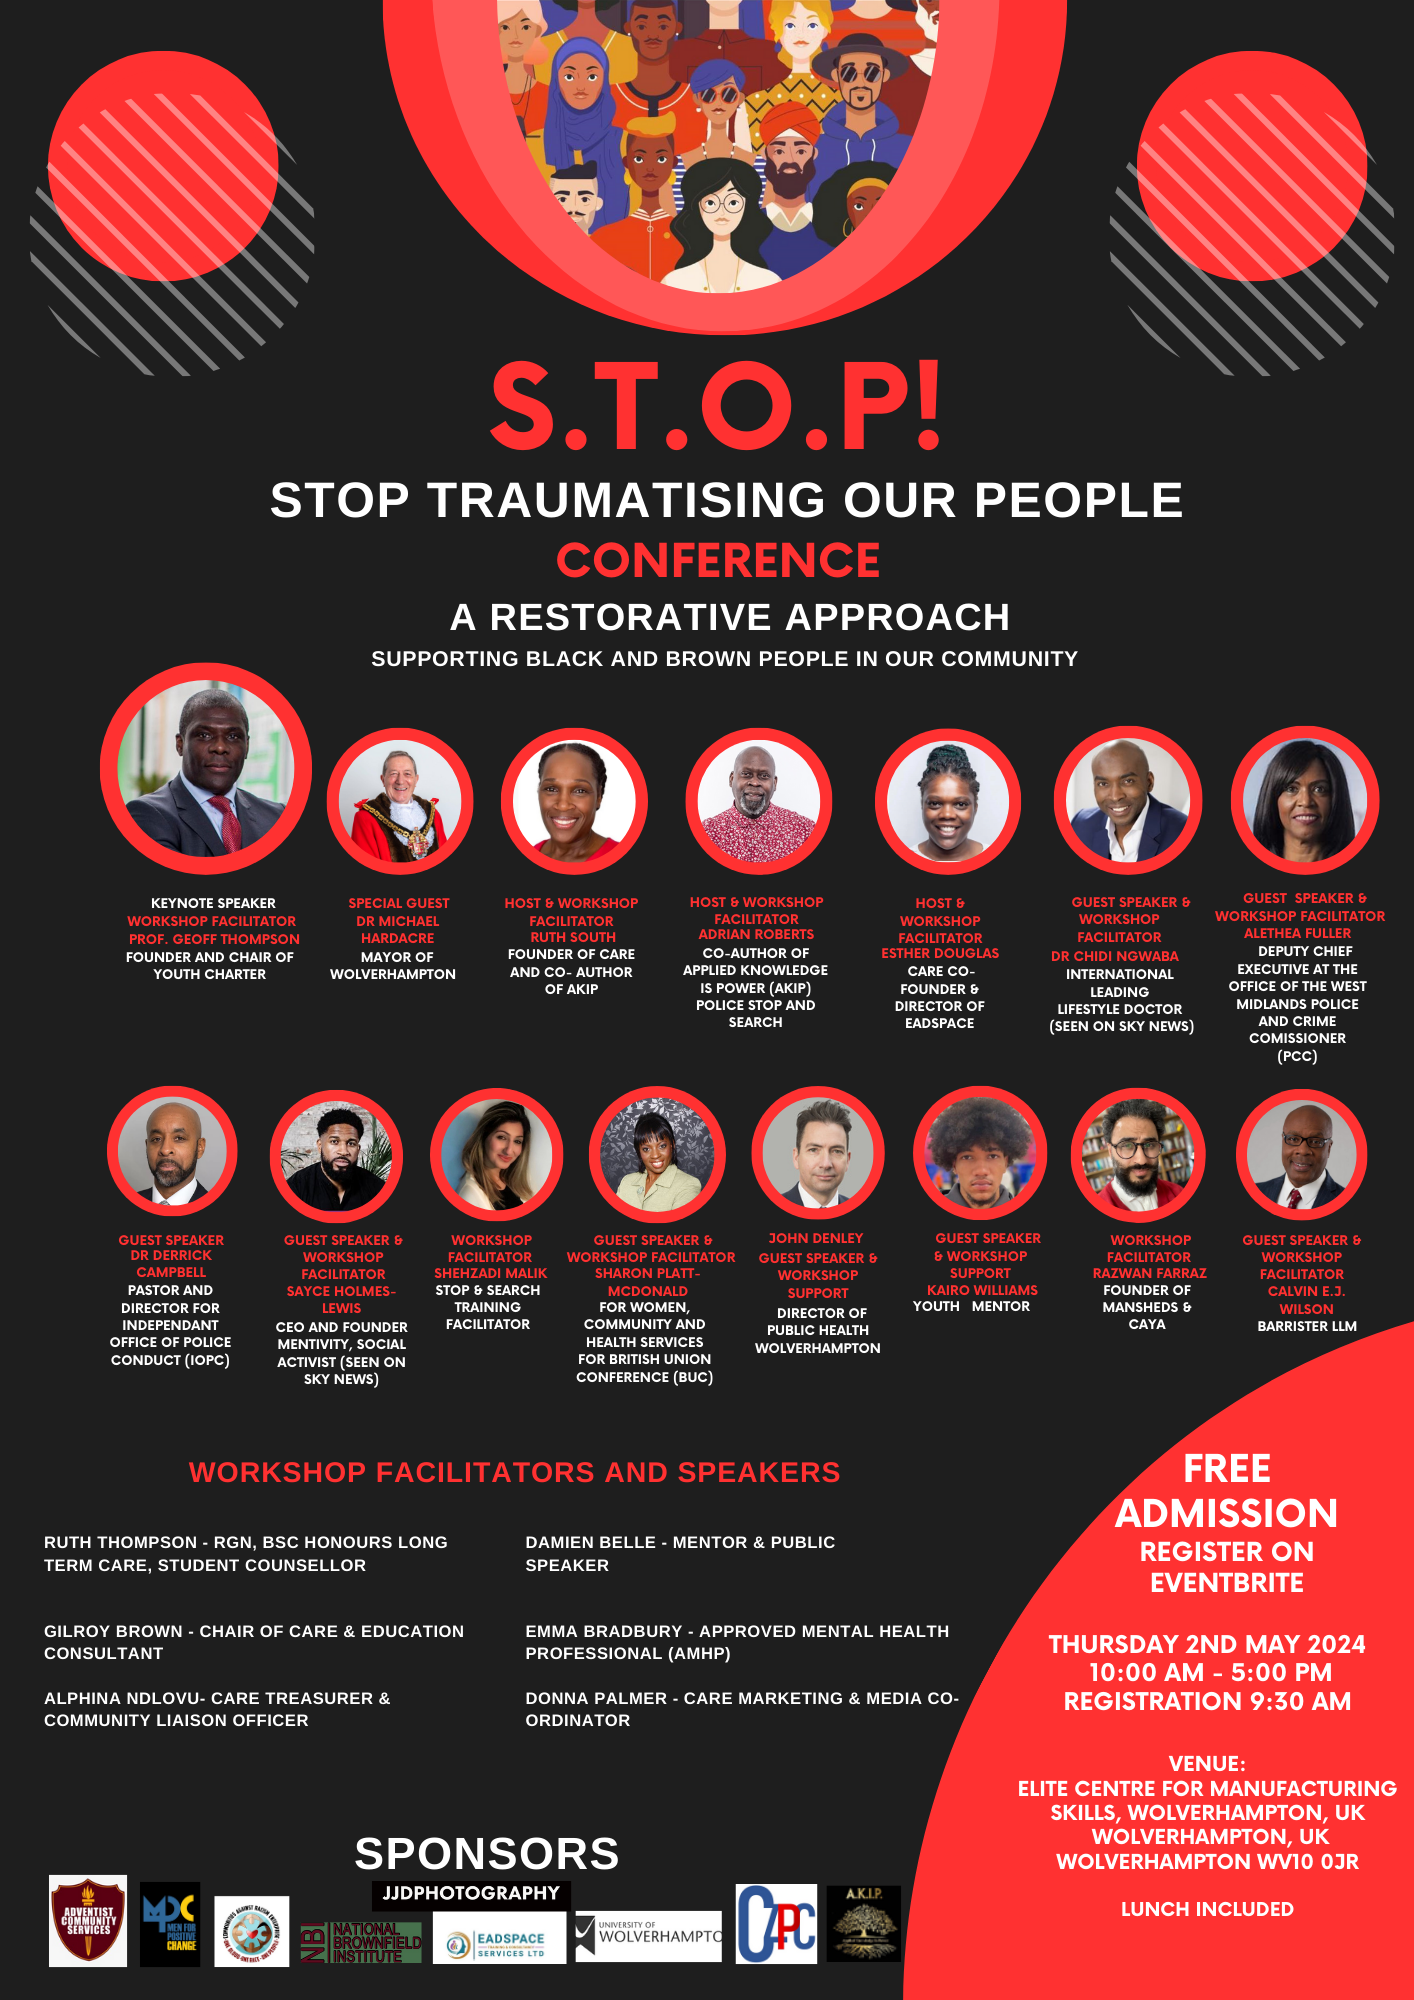 S.T.O.P! CONFERENCE - STOP TRAUMATISING OUR PEOPLE, A RESTORATIVE APPROACH